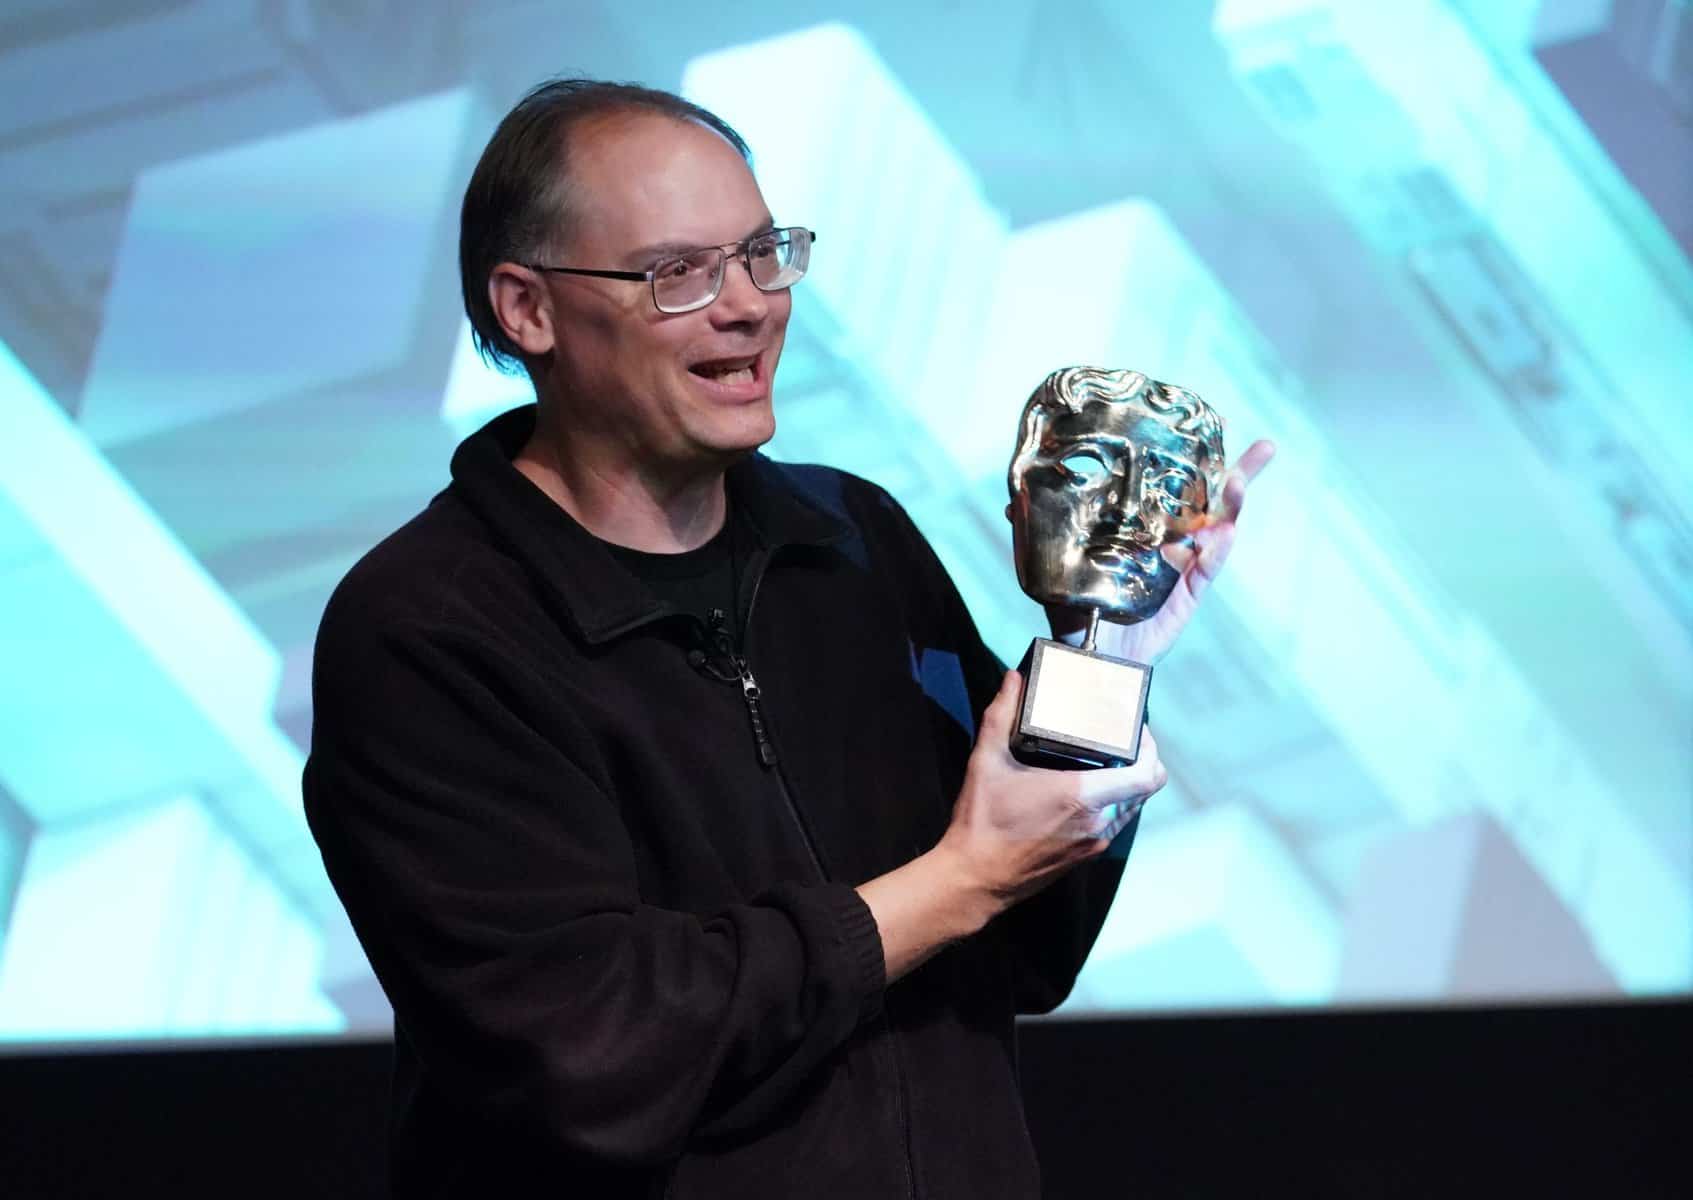 bafta-presents-special-award-to-epic-games